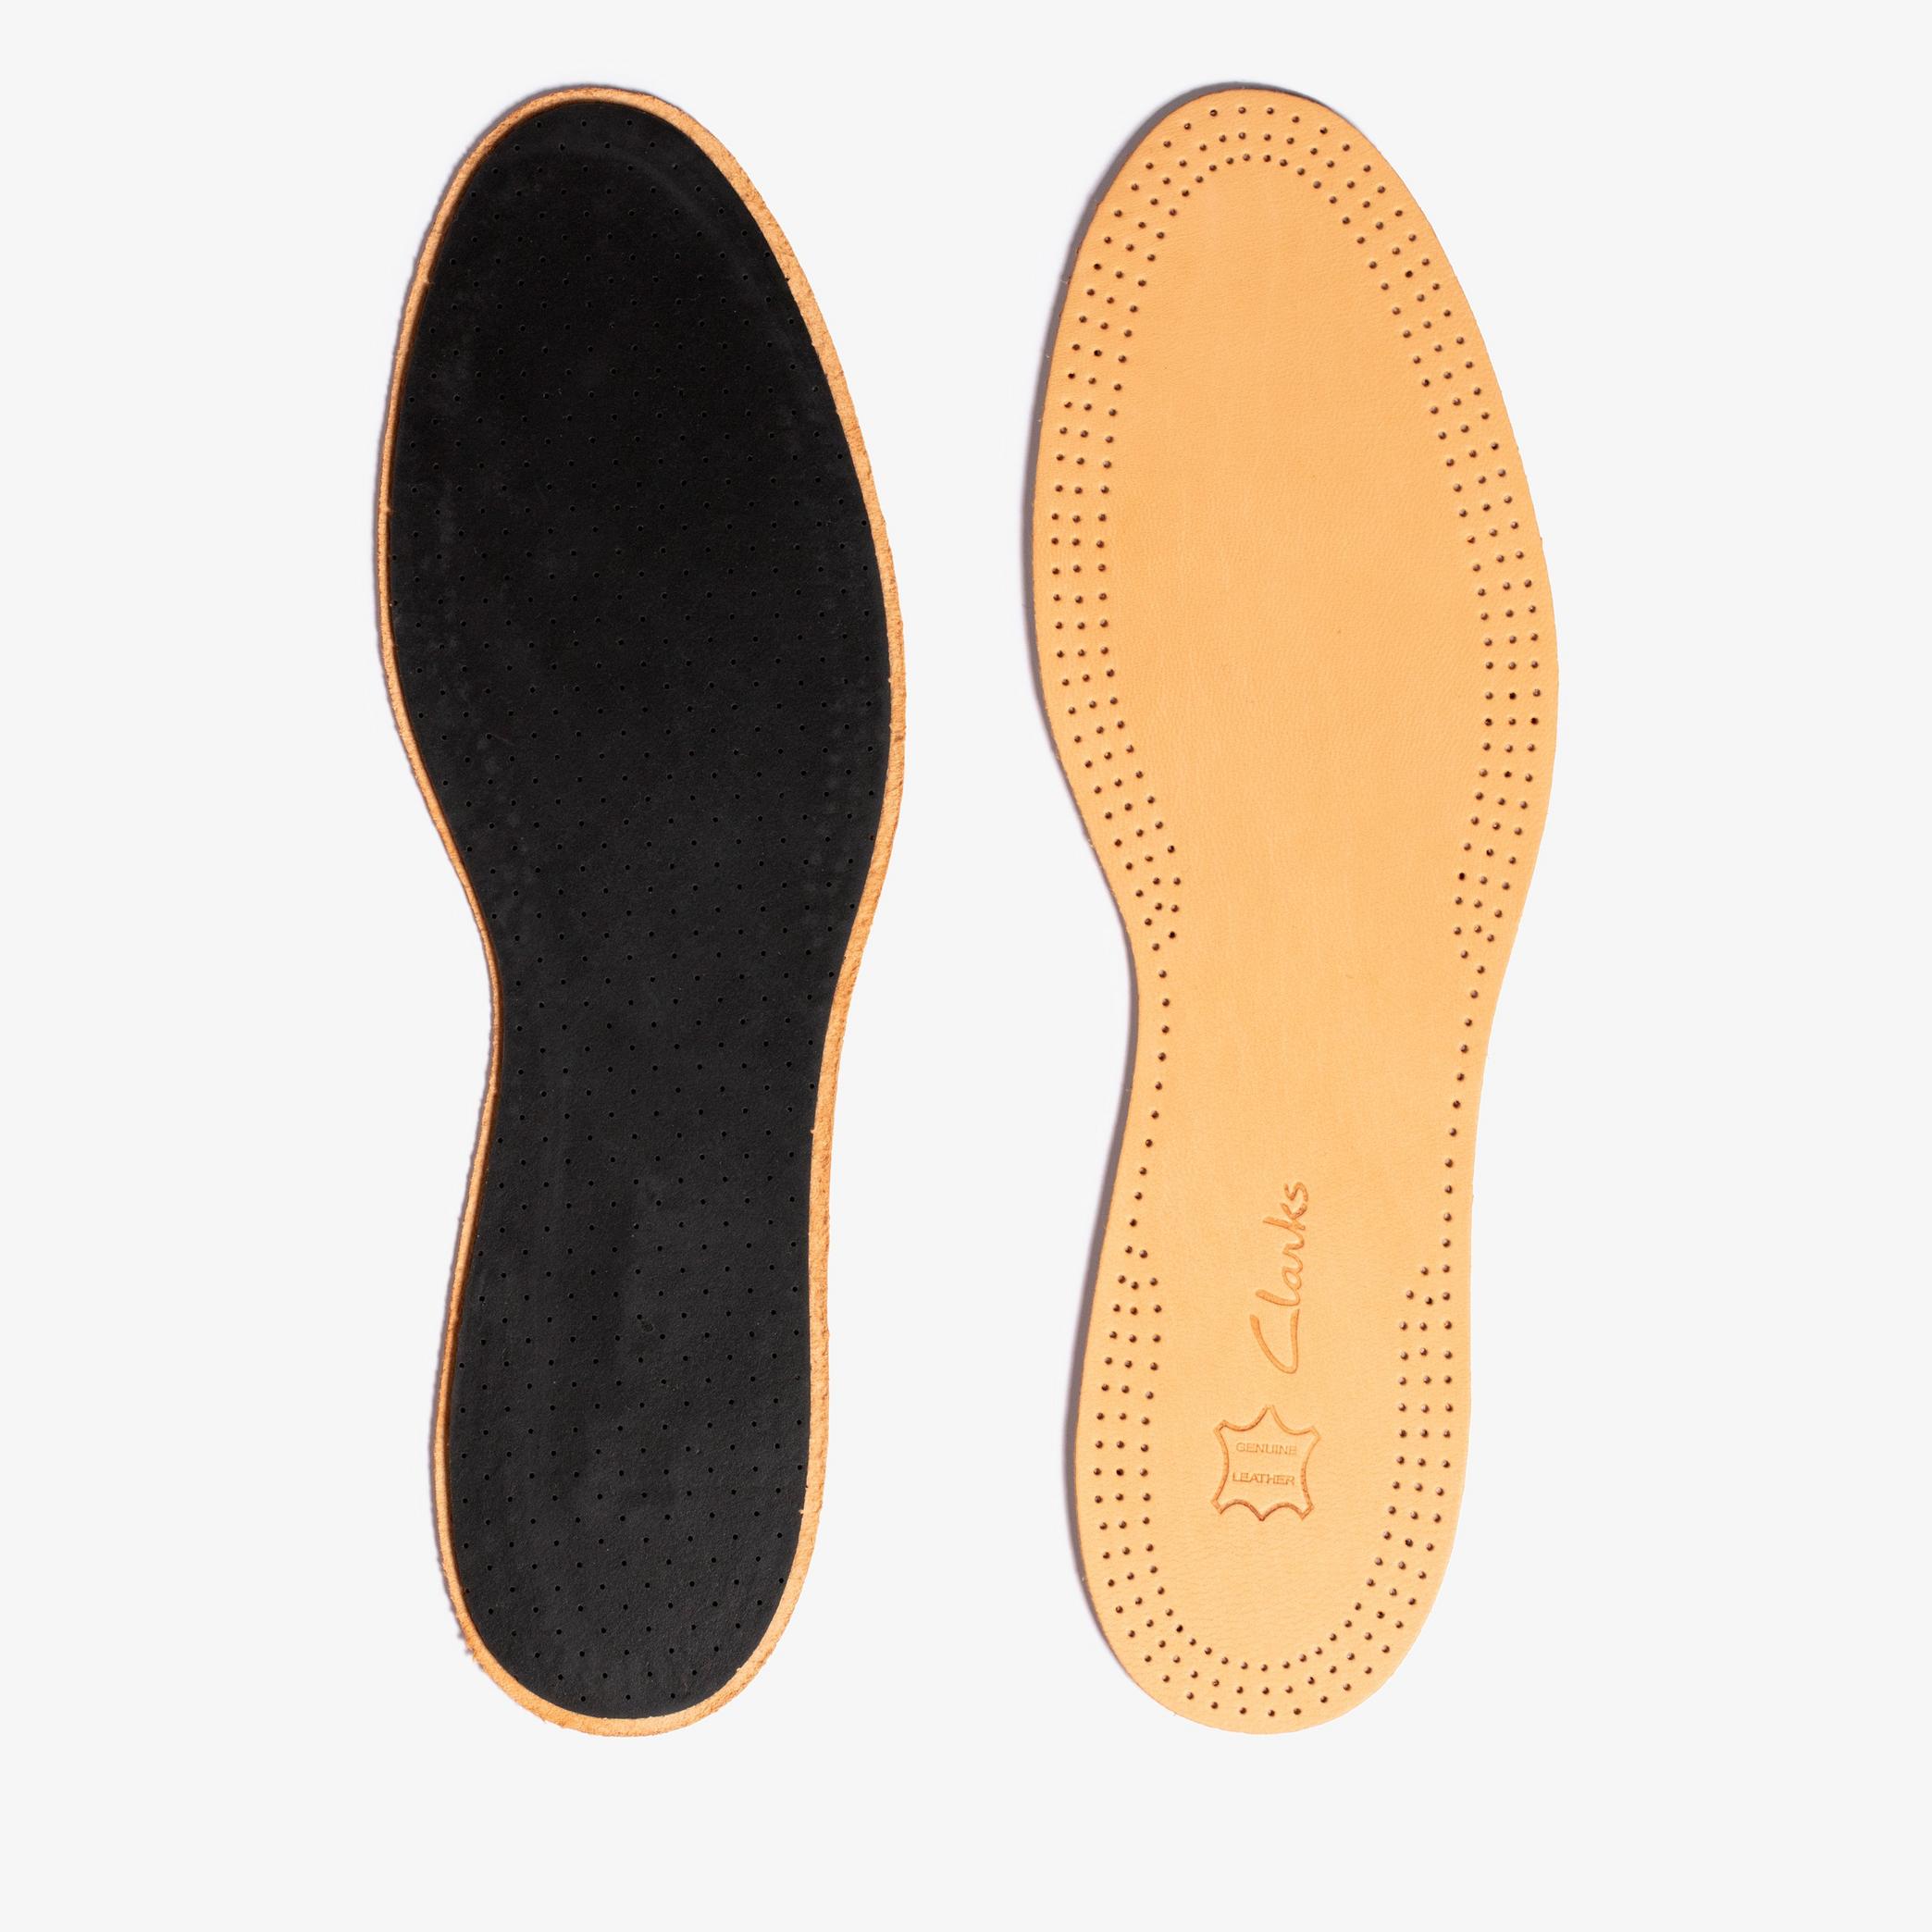 Leather insole size 11  Insoles, view 2 of 3